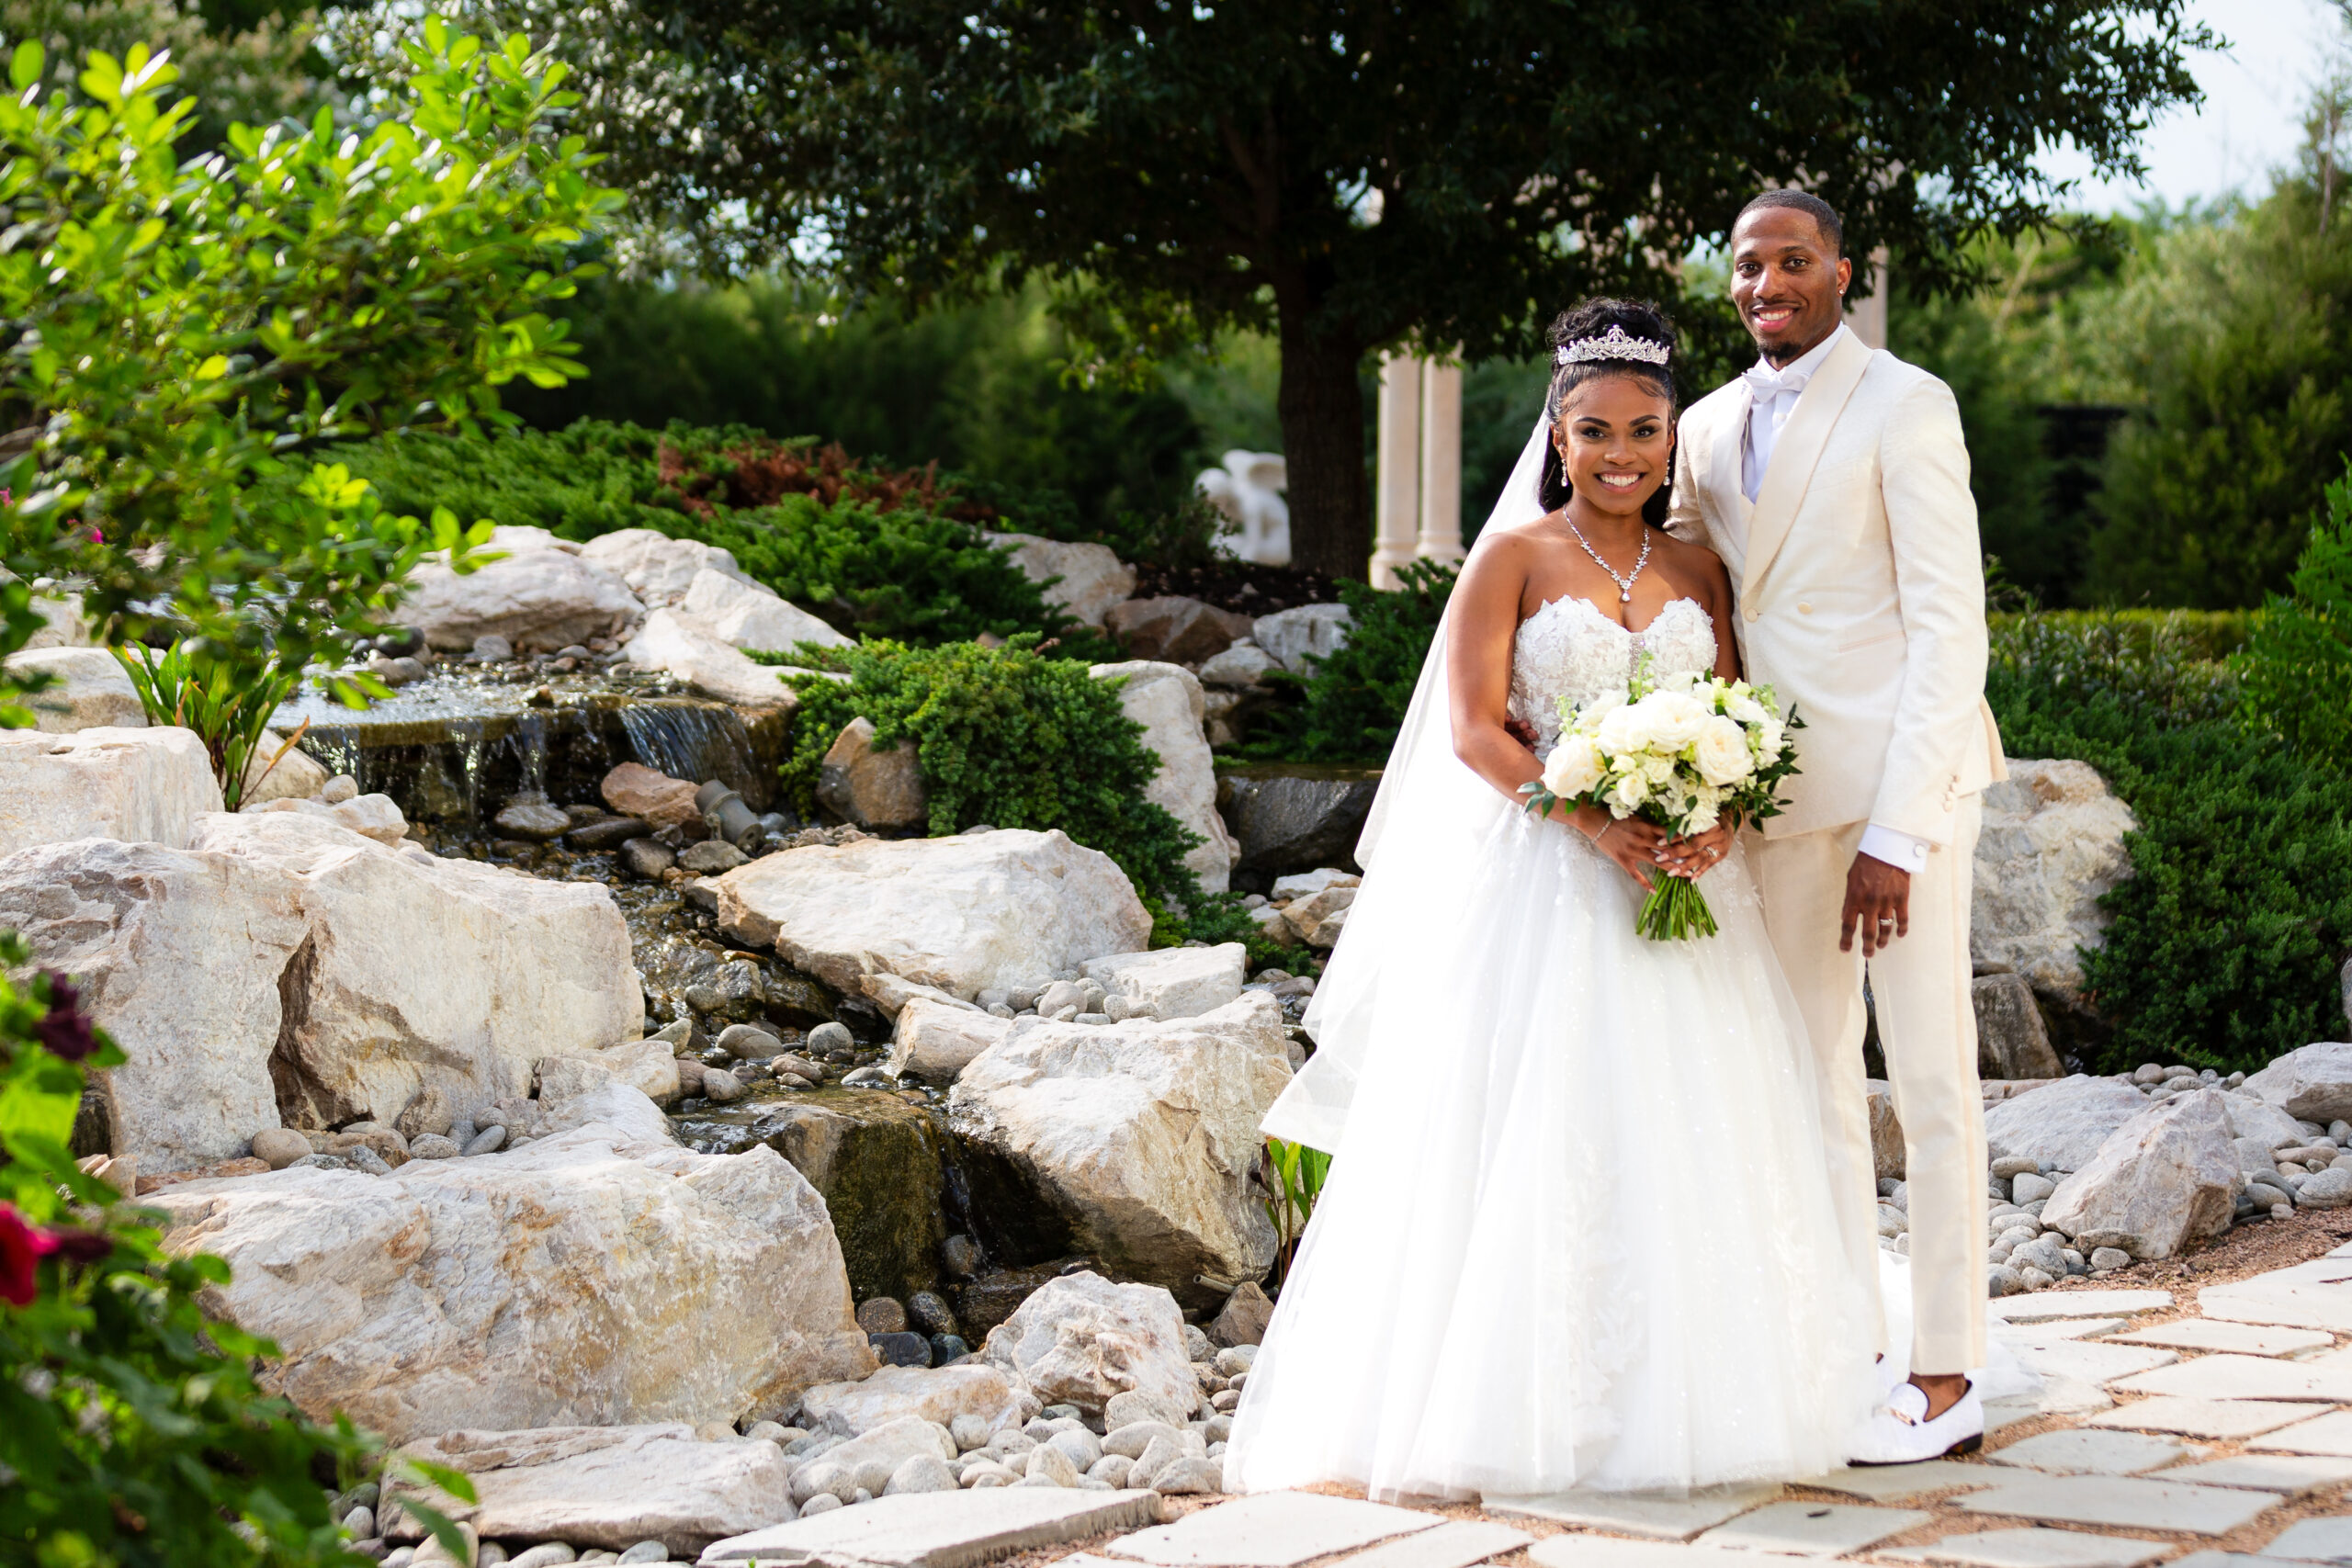 Bride and groom dressed in all white standing together in front of lush waterfall feature at Knotting Hill Place wedding venue in Little Elm Texas